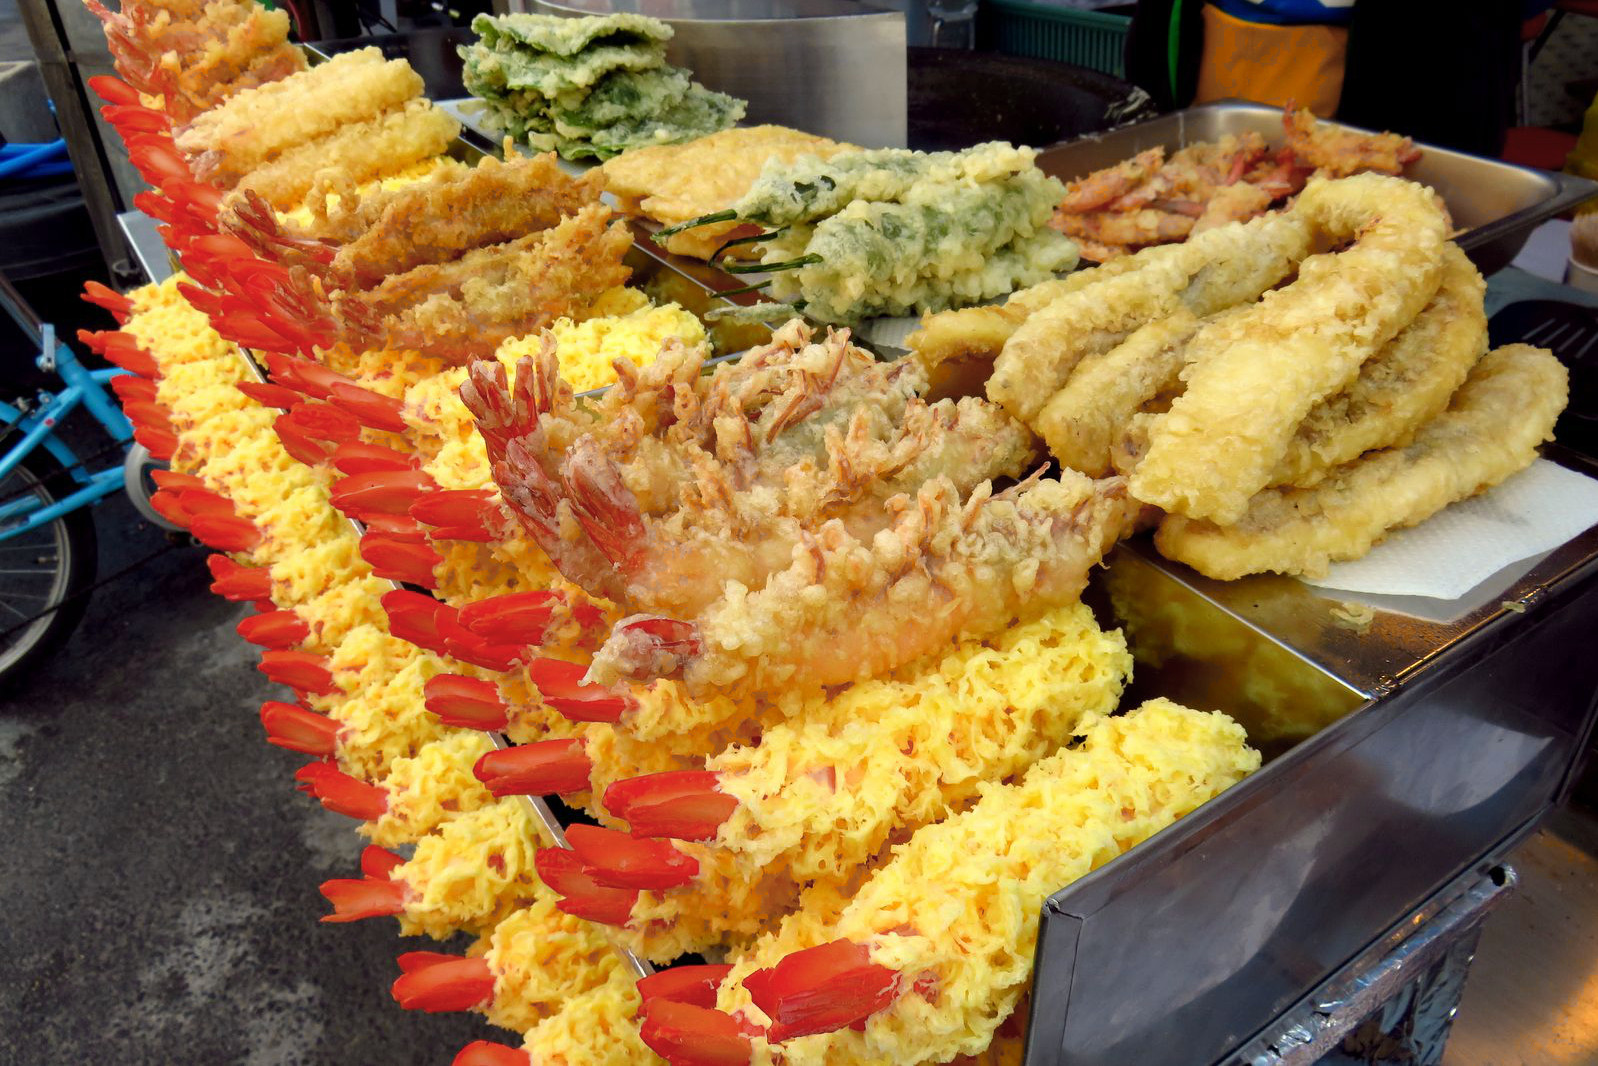 Deep-fried delight: prawn and vegetable twigim. Image by Phillip Tang / Lonely Planet